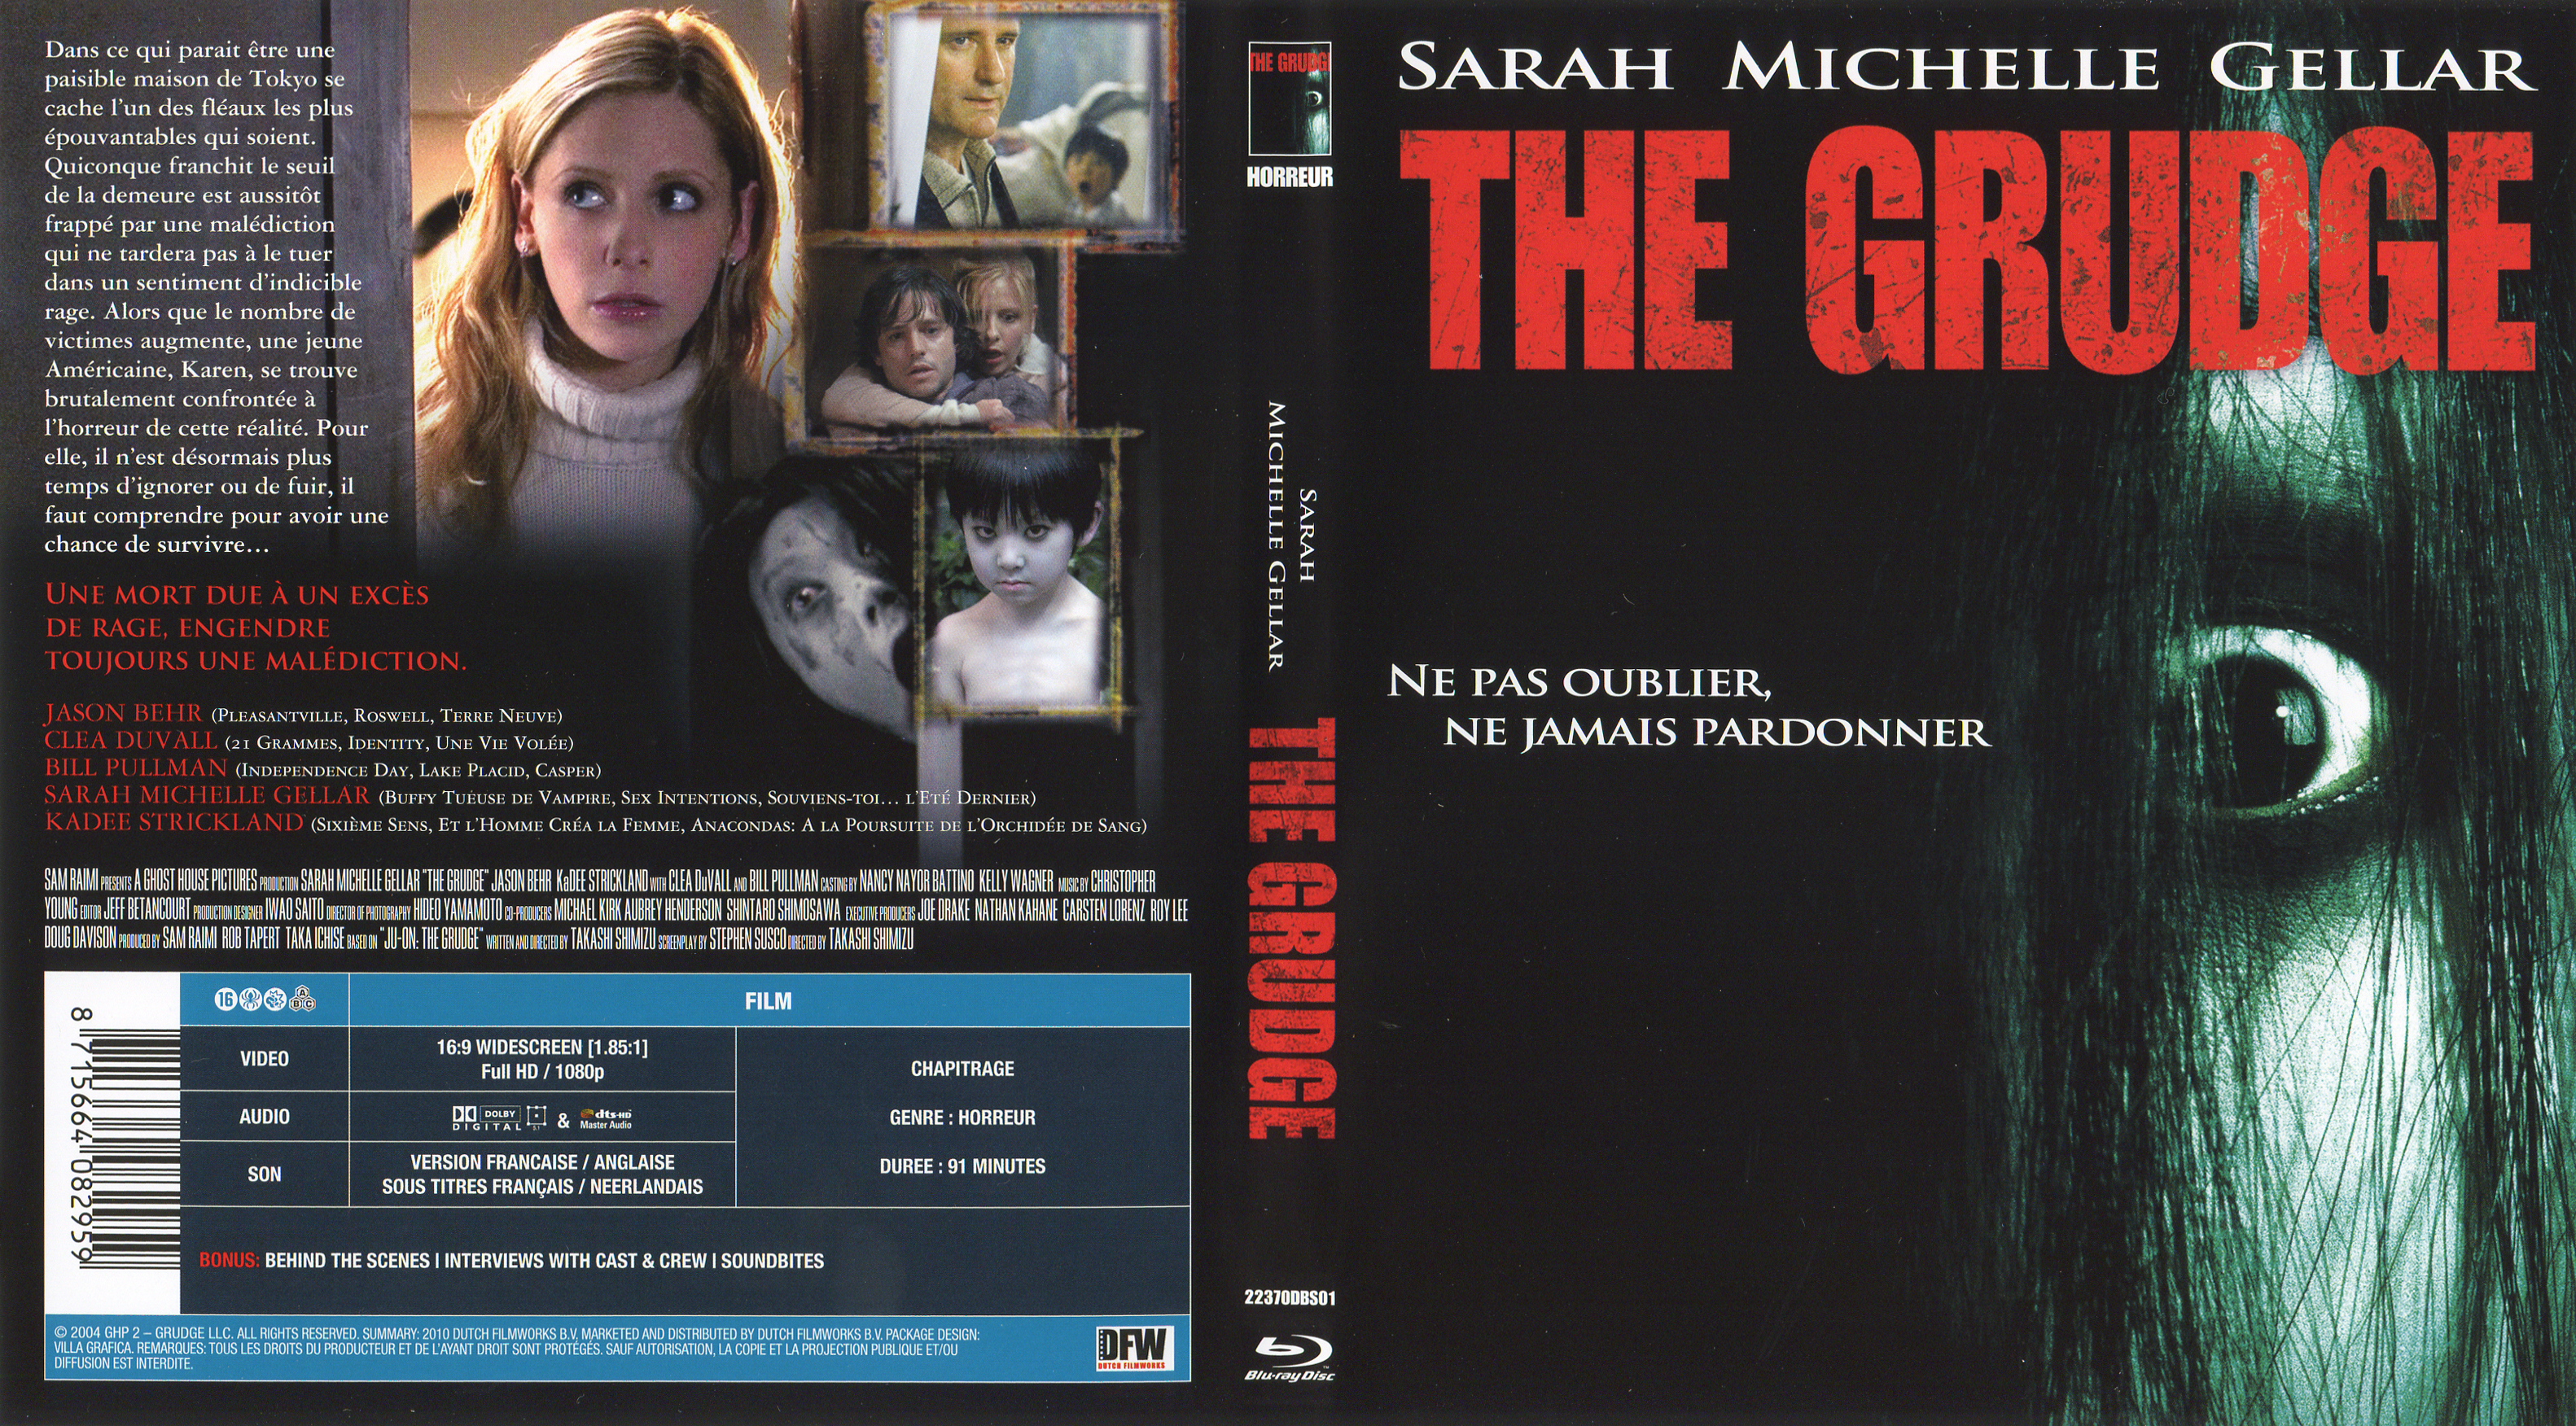 Jaquette DVD The grudge (BLU-RAY) v3